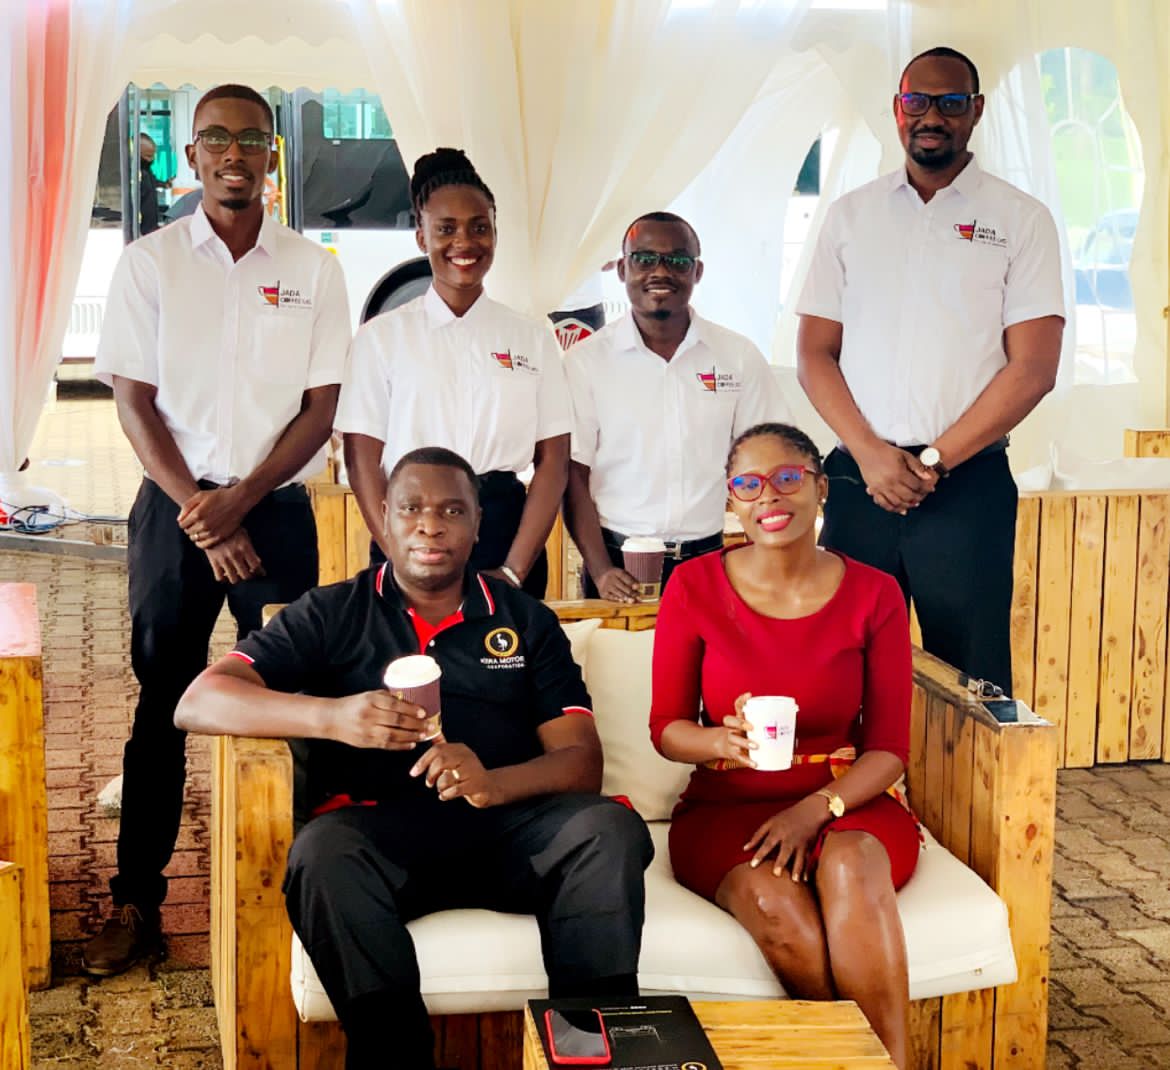 Small team with a strong impact. Meet @JadaCoffee team that did magic at the #NationalScienceWeek that took place at Kololo grounds.

Cc: @PIMusasizi @jackiearinda